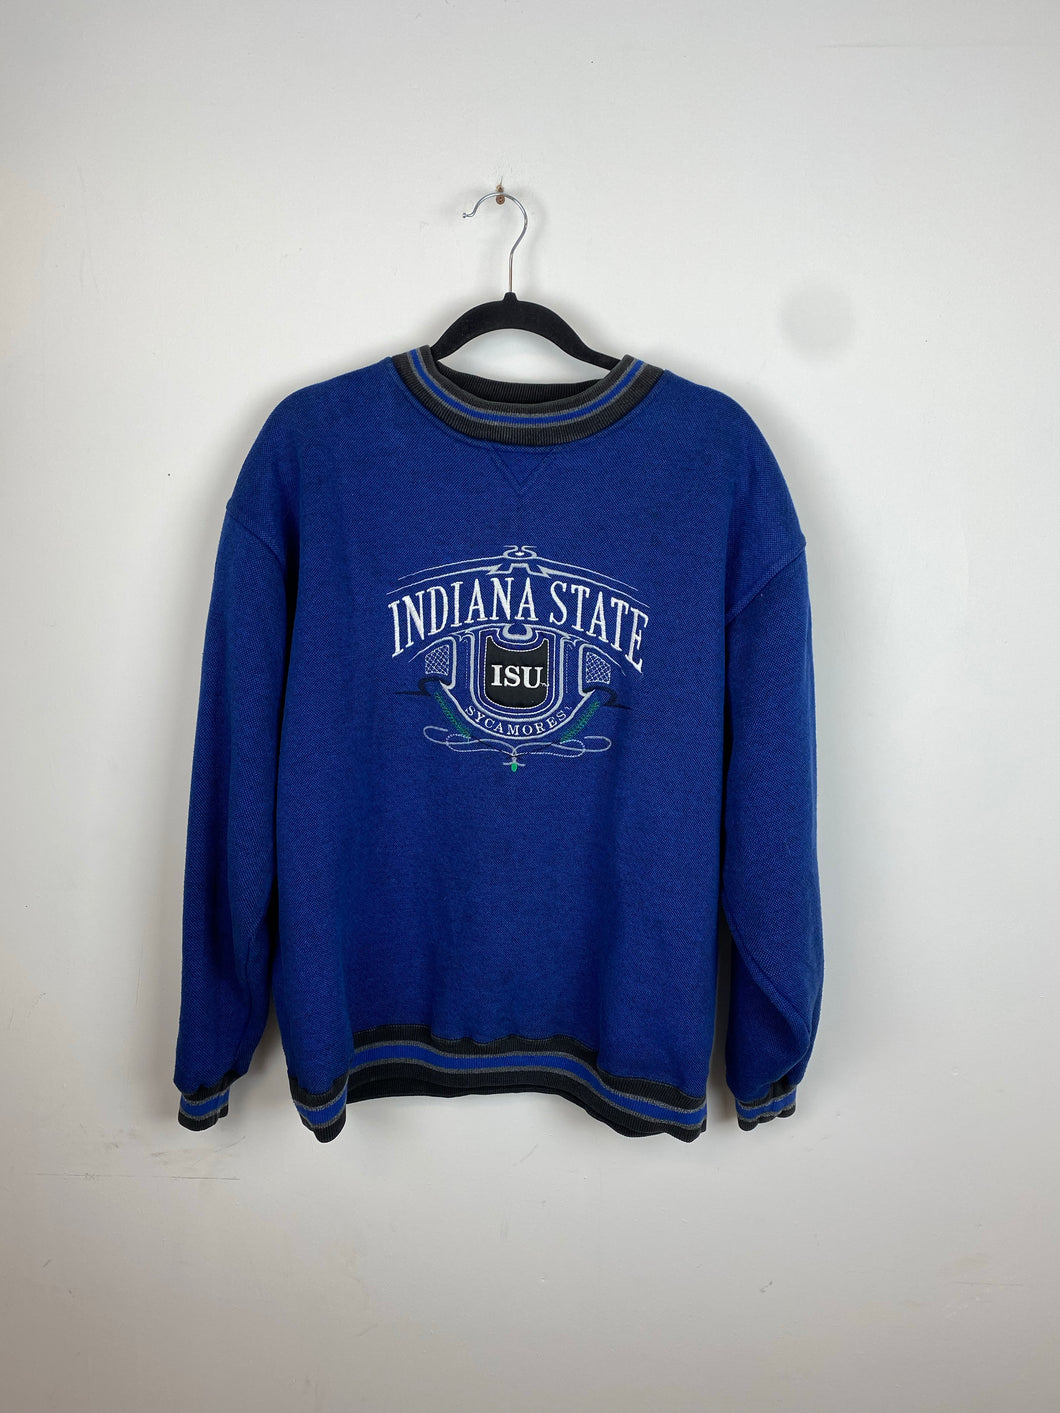 90s embroidered Indiana State crewneck